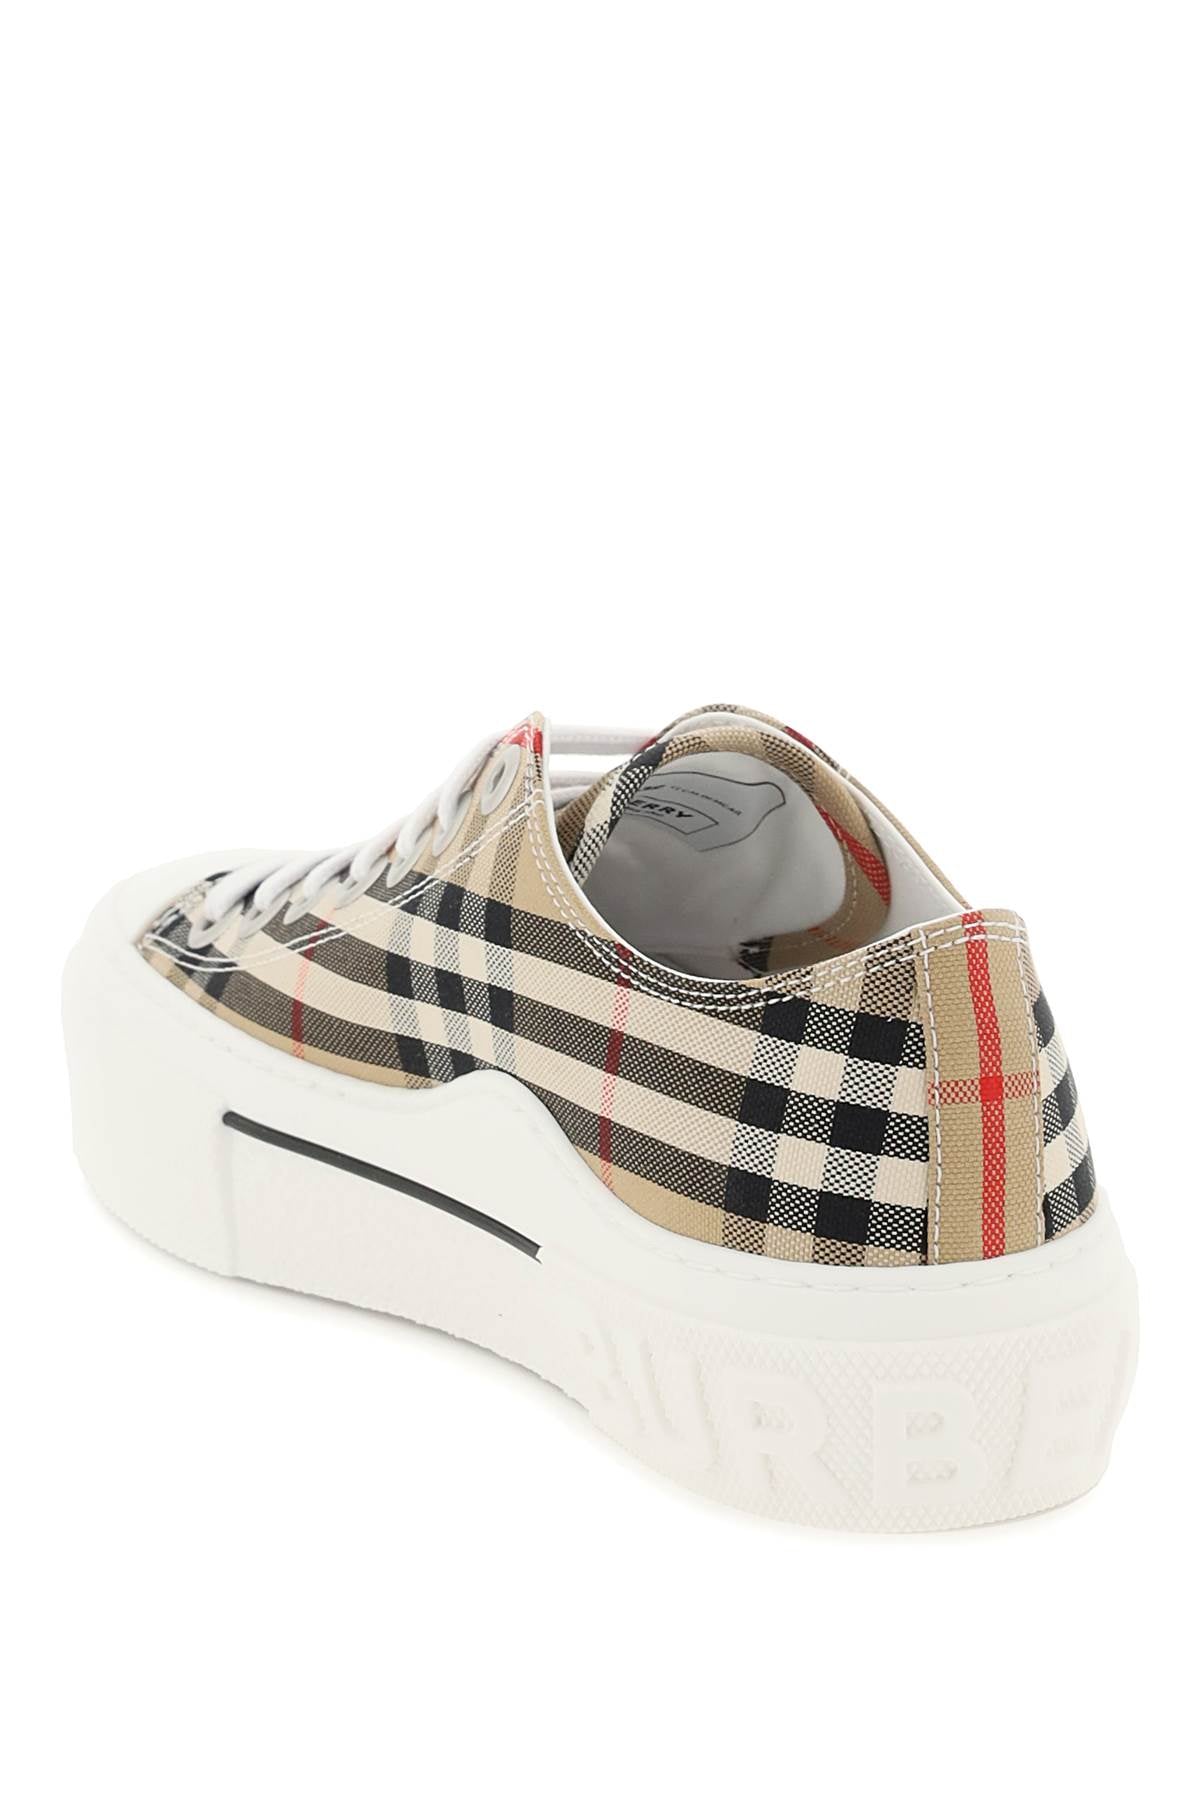 Burberry Burberry vintage check low sneakers